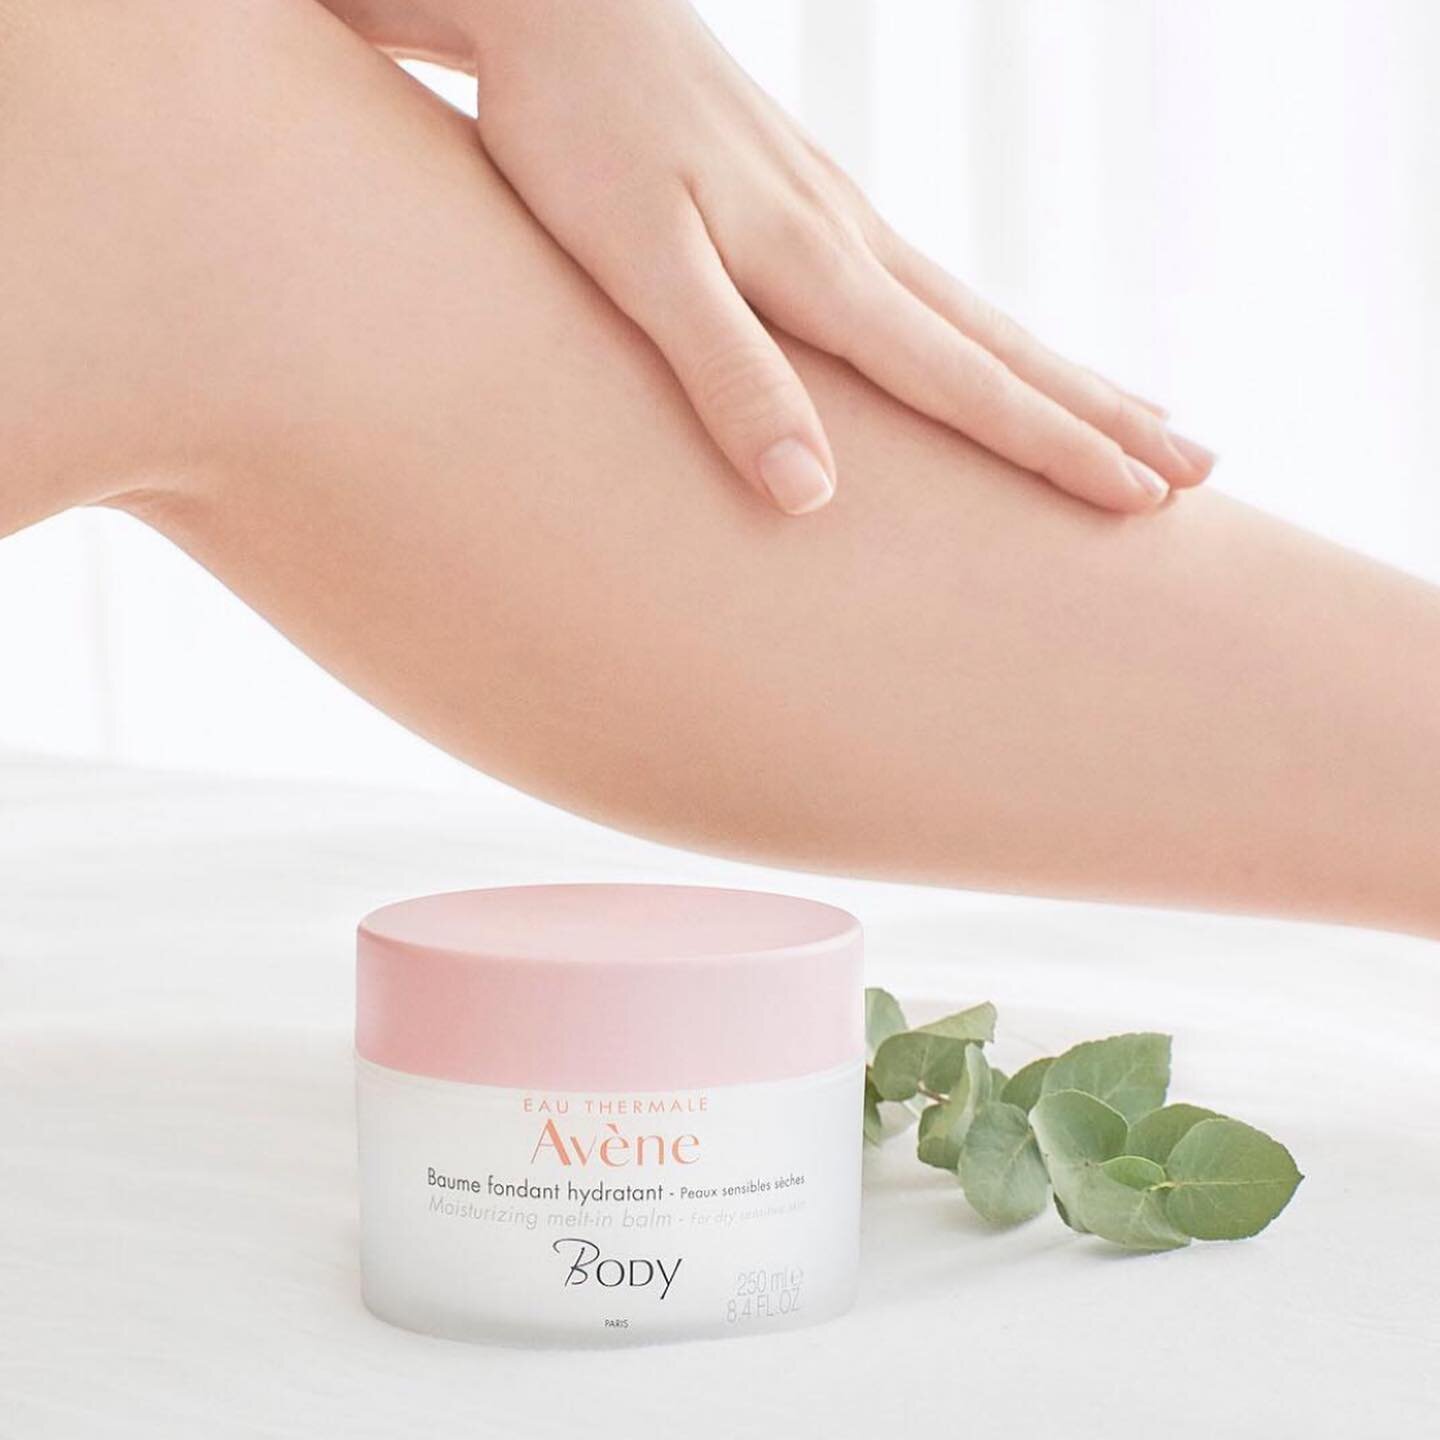 We are slightly obsessed with Avène&rsquo;s Moisturizing Melt-In Balm 😍 This luxurious and award-winning body creme melts into your skin and leaves it hydrated and supple for 24 hours. Priced at just $30, we can&rsquo;t get enough! #Avène #Skincar